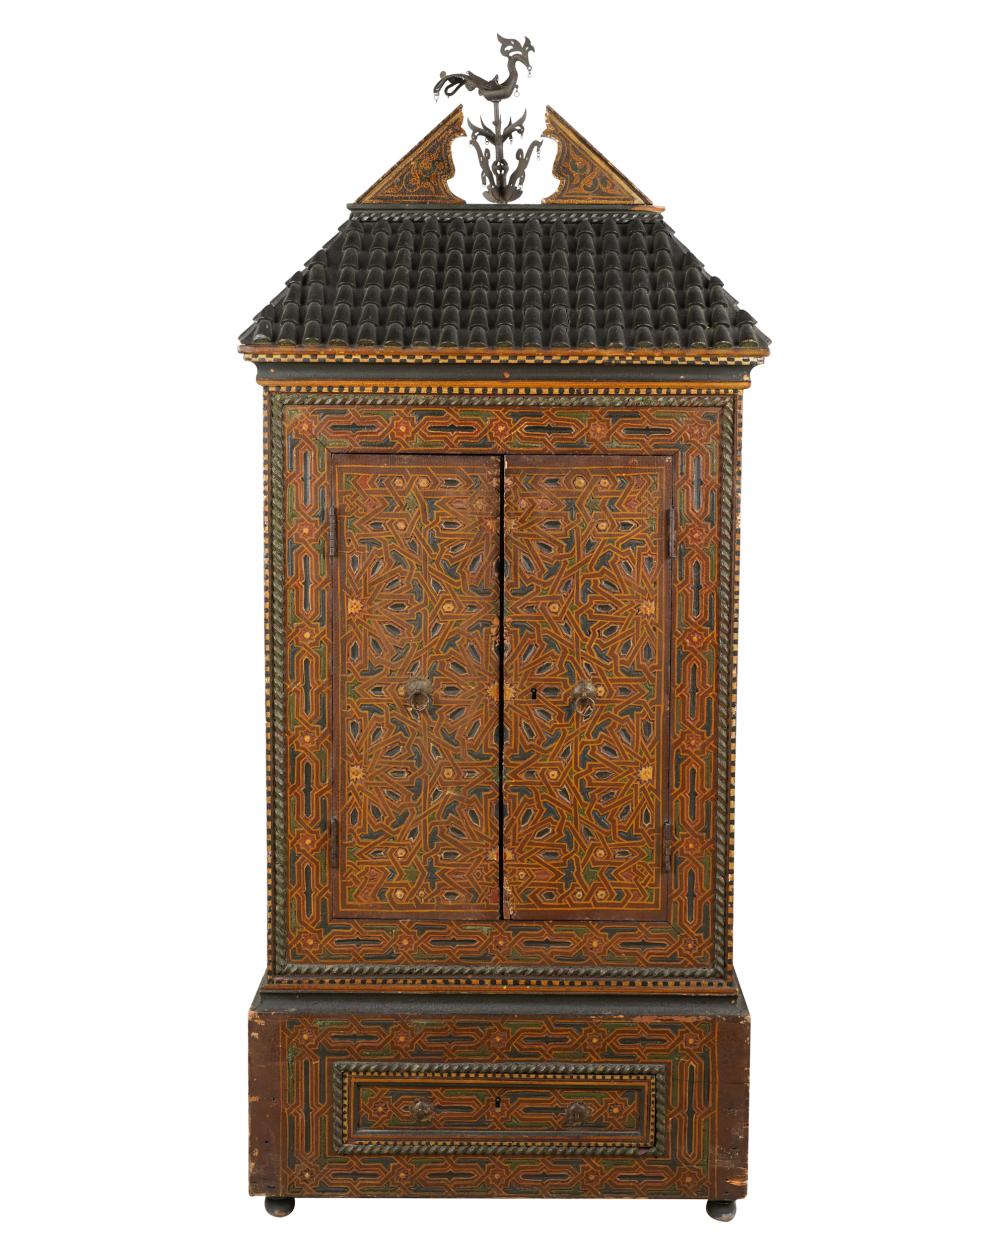 ASIAN POLYCHROME PAINTED WOOD CABINETthe 334b54